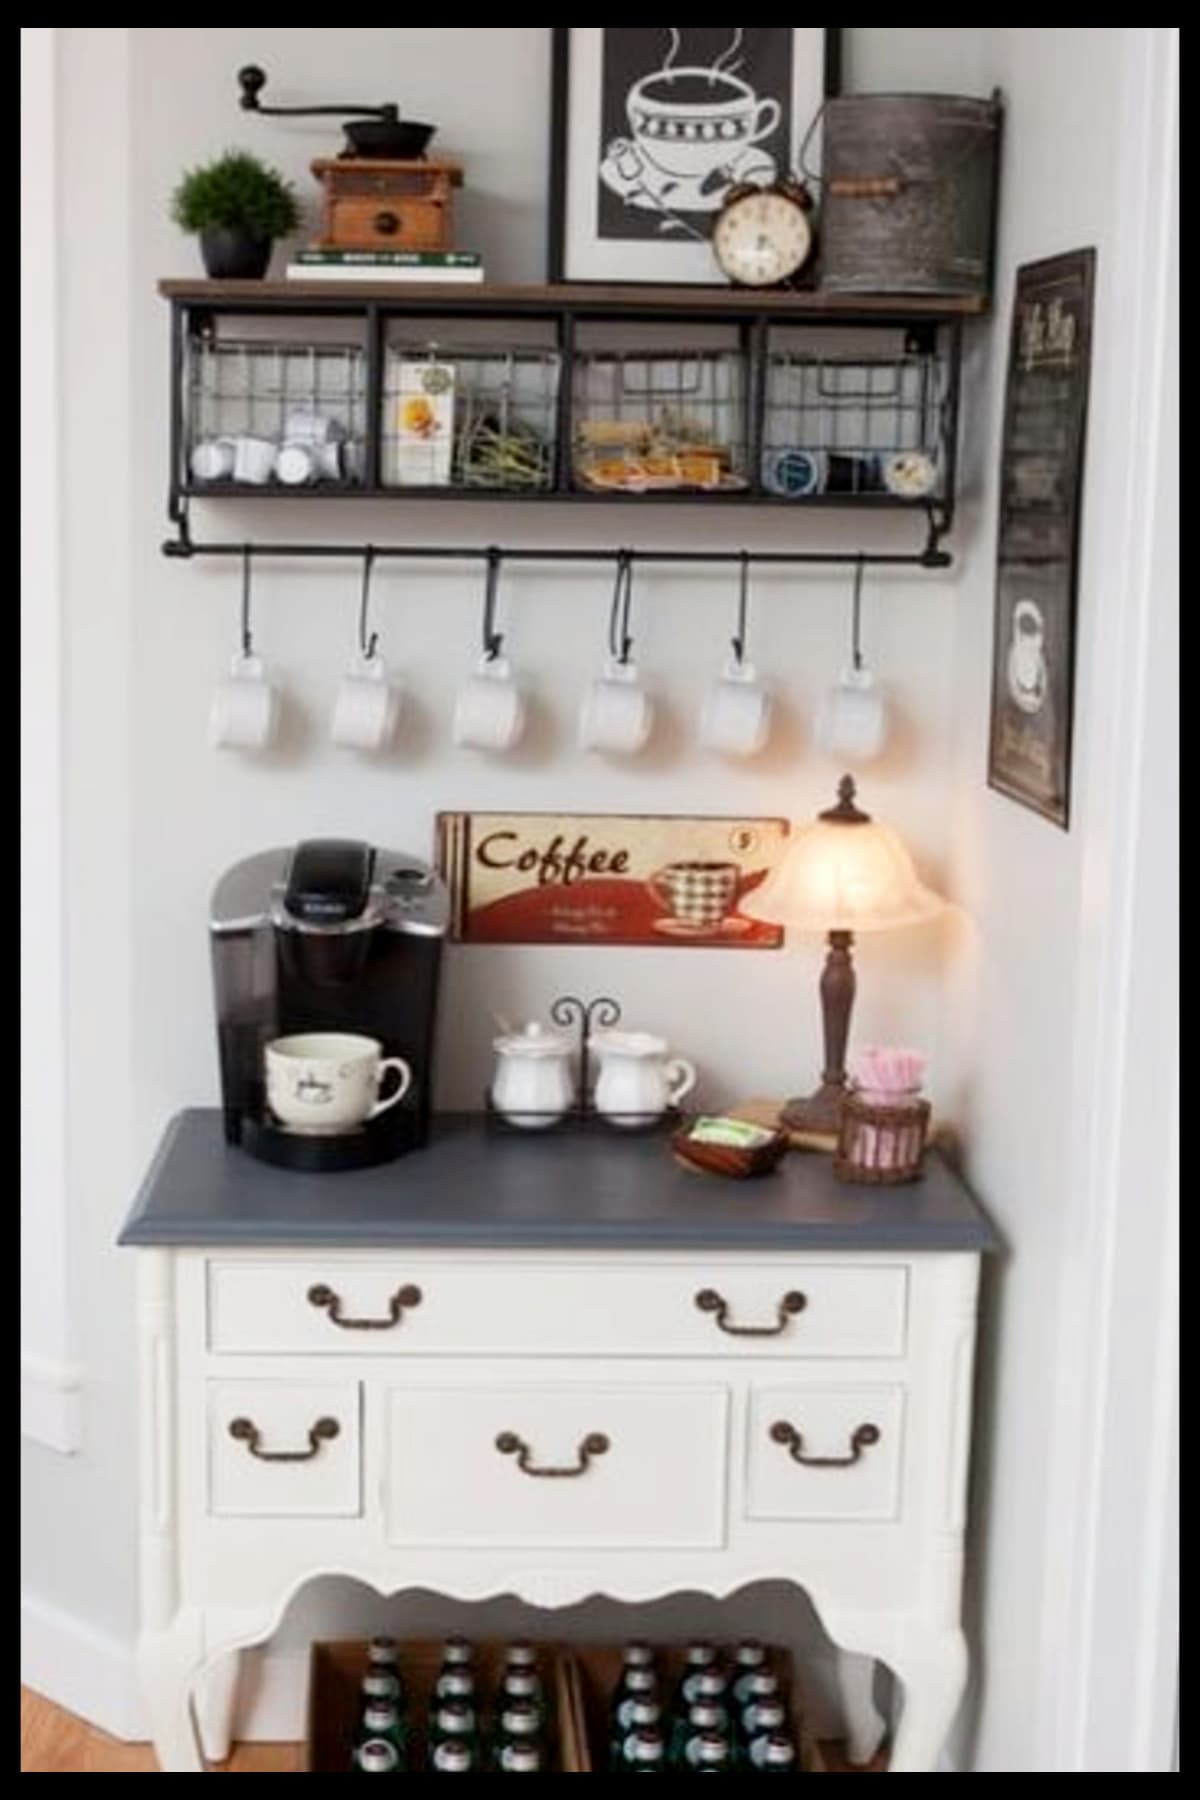 Grey and white kitchen coffee bar set up against the wall in a corner nook off the breakfast room